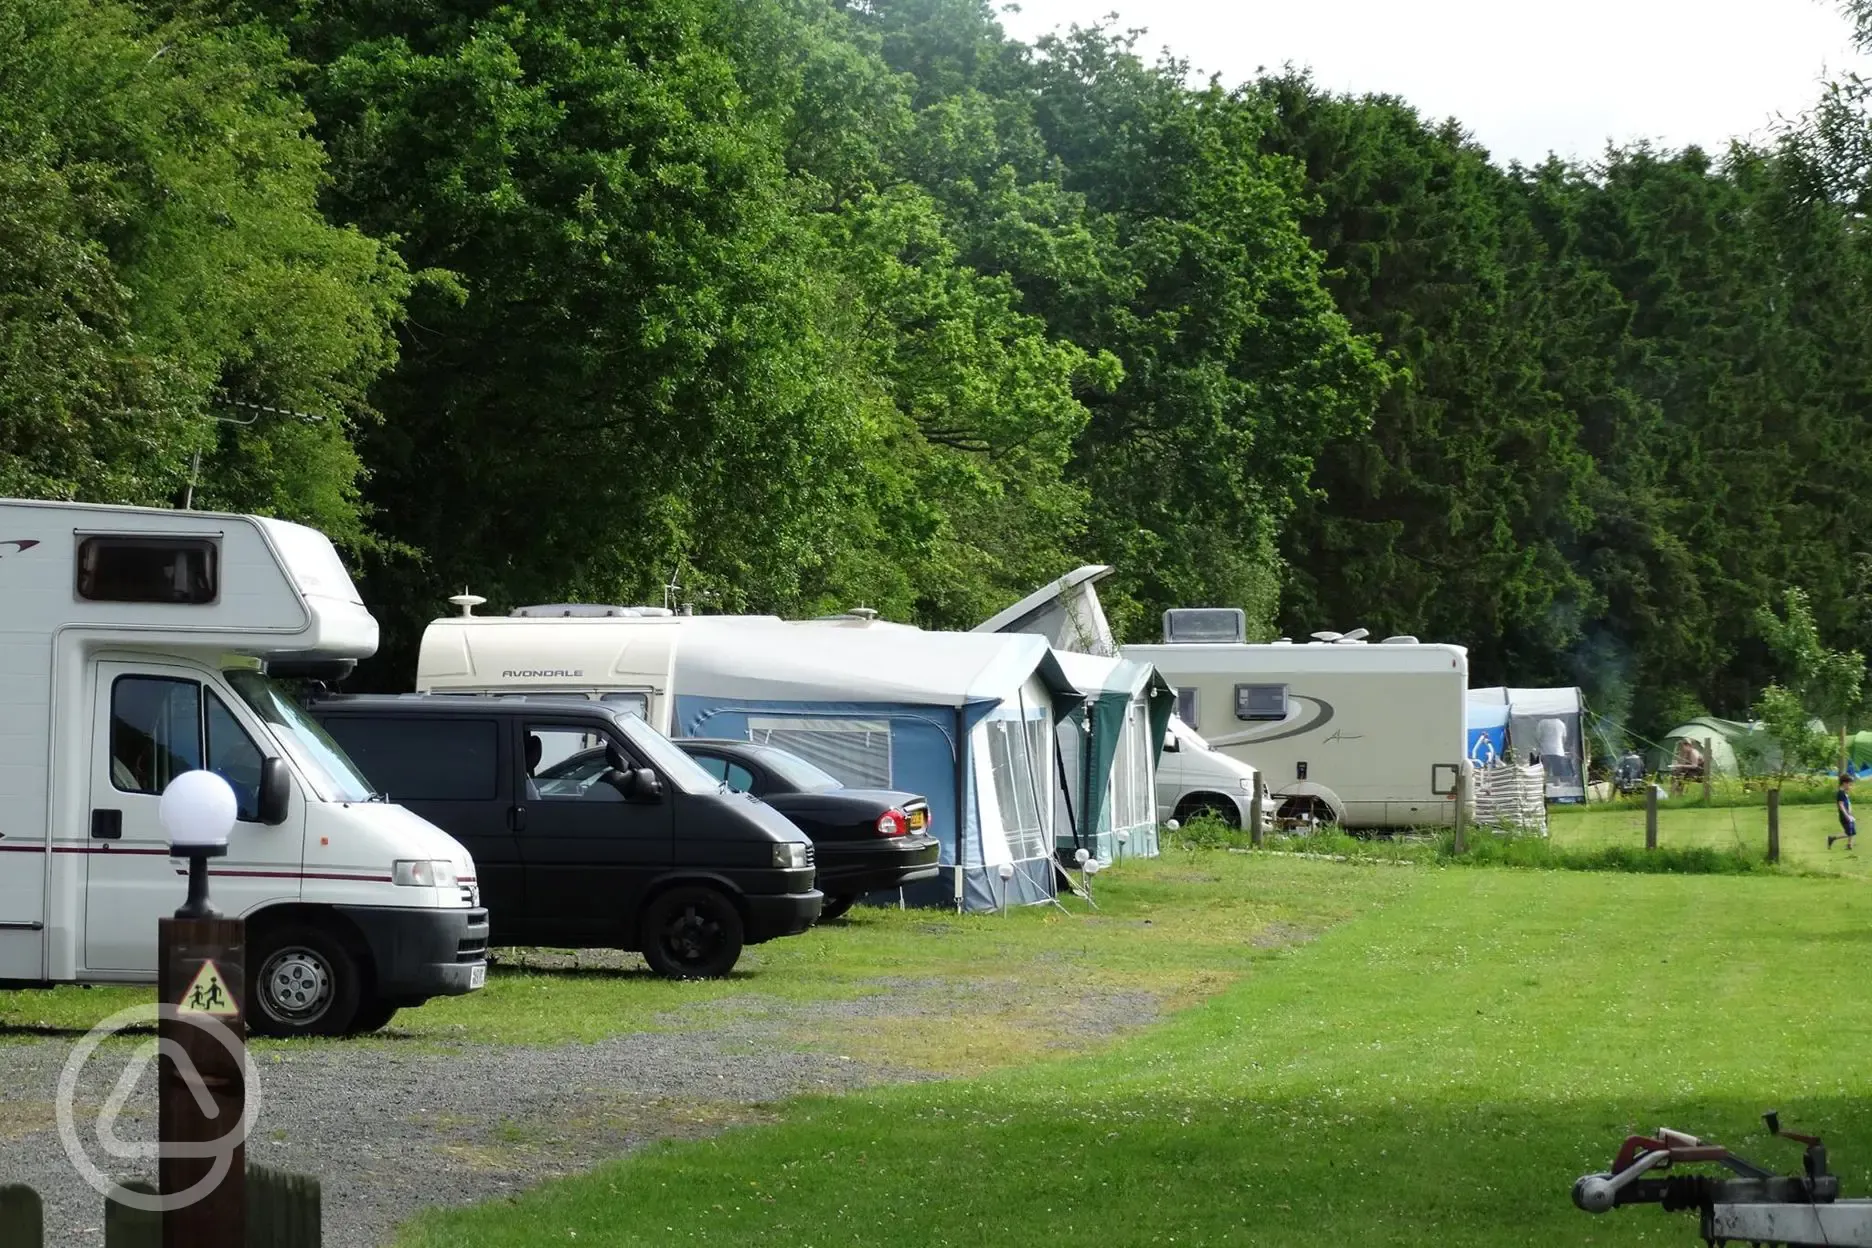 Touring pitches